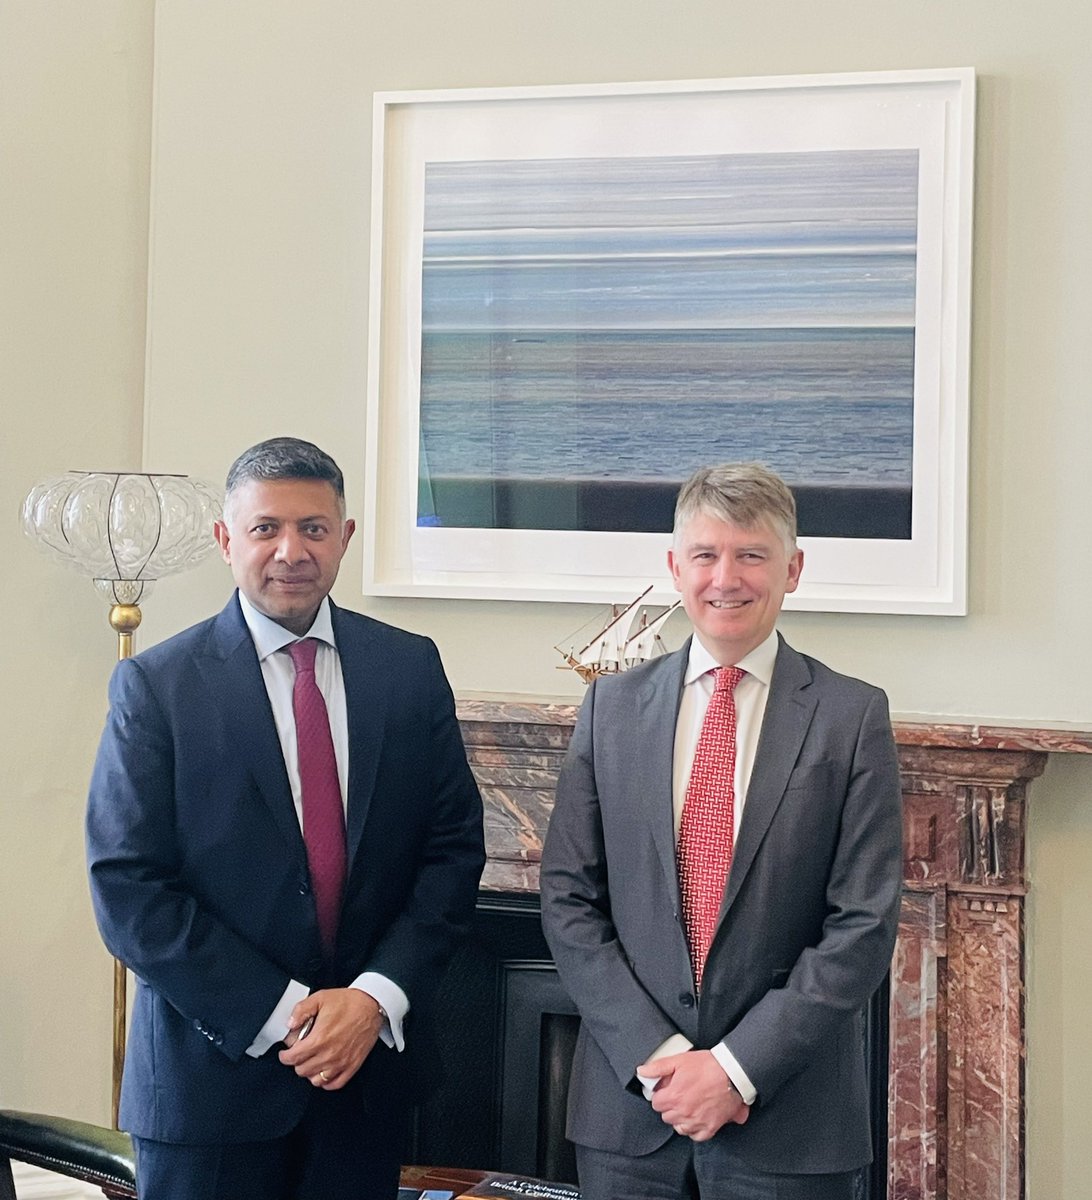 HC @VDoraiswami had a productive discussion today with Owen Jenkins, Interim DG for Indo-Pacific, Middle East & North Africa @FCDOGovUK. They assessed the current state of India-UK bilateral relations & delved into shared geopolitical concerns.@MEAIndia @sujitjoyghosh